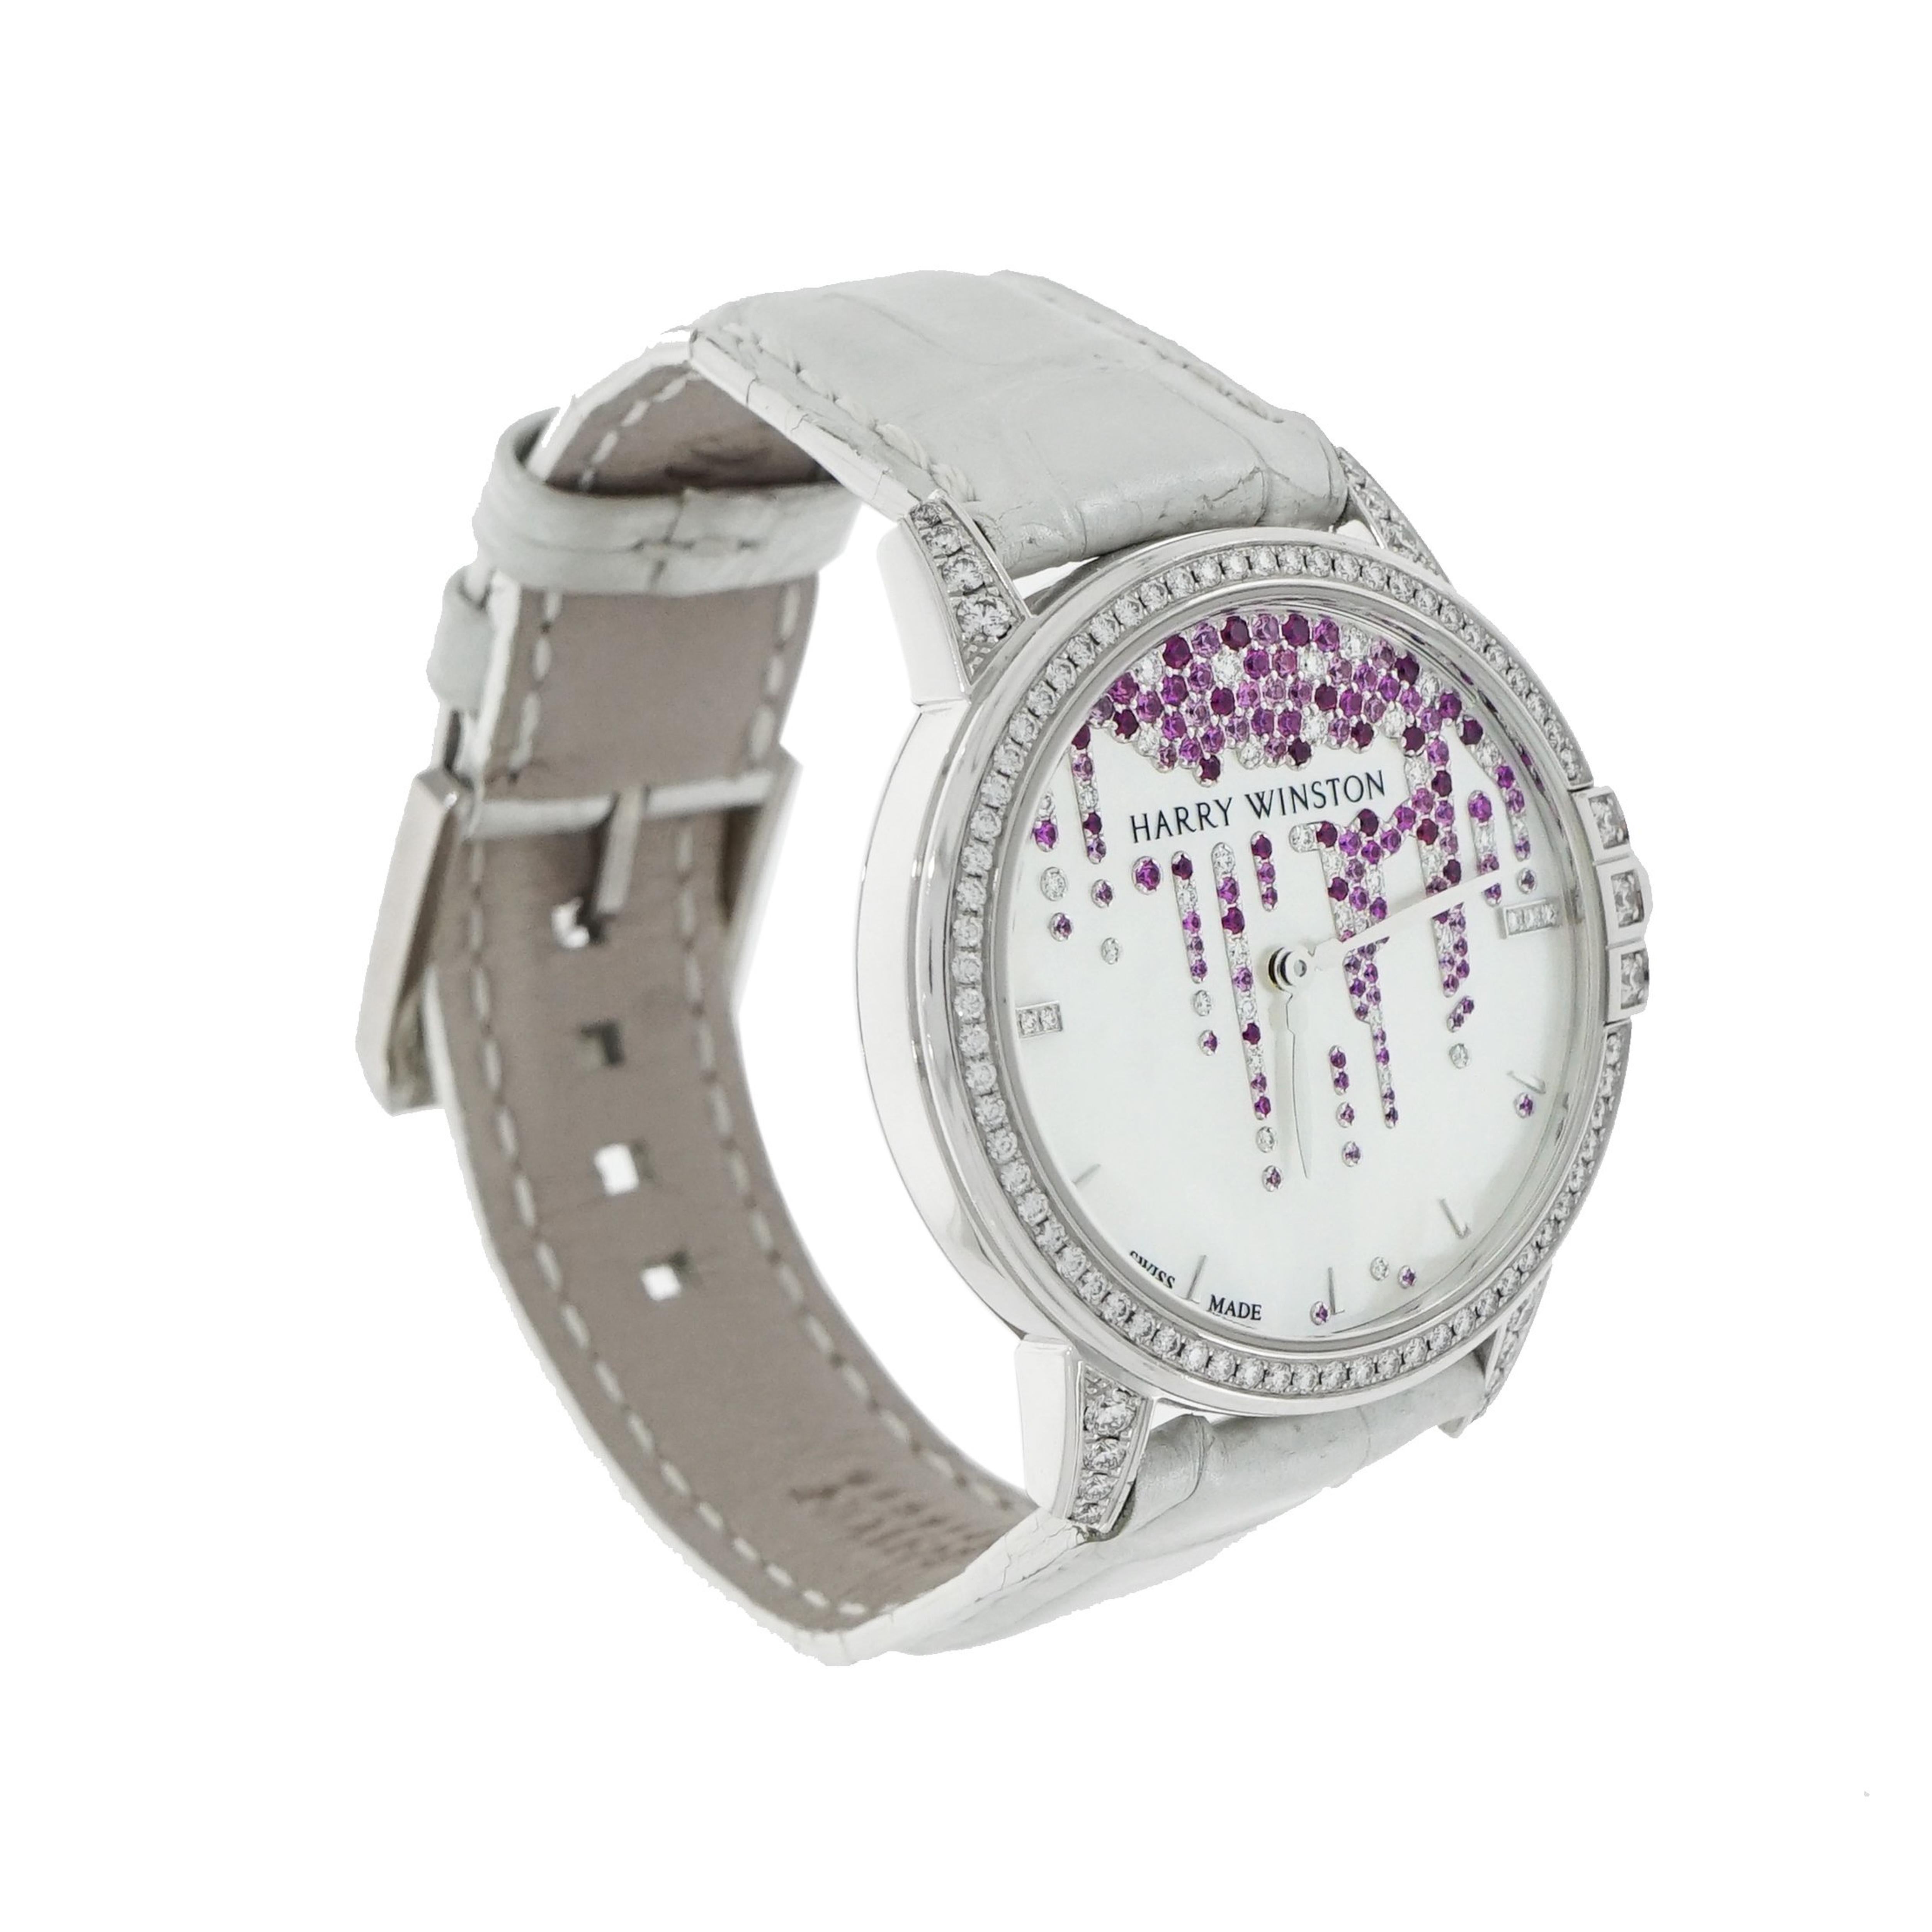 Effortlessly elegant and timelessly classical, this Midnight timepiece is exquisite!
Midnight Diamond Stalactites 36mm in 18k white gold. The beaded mother-of-pearl dial is decorated with stalactites of 96 pink sapphires (approximately 0.46 carat),